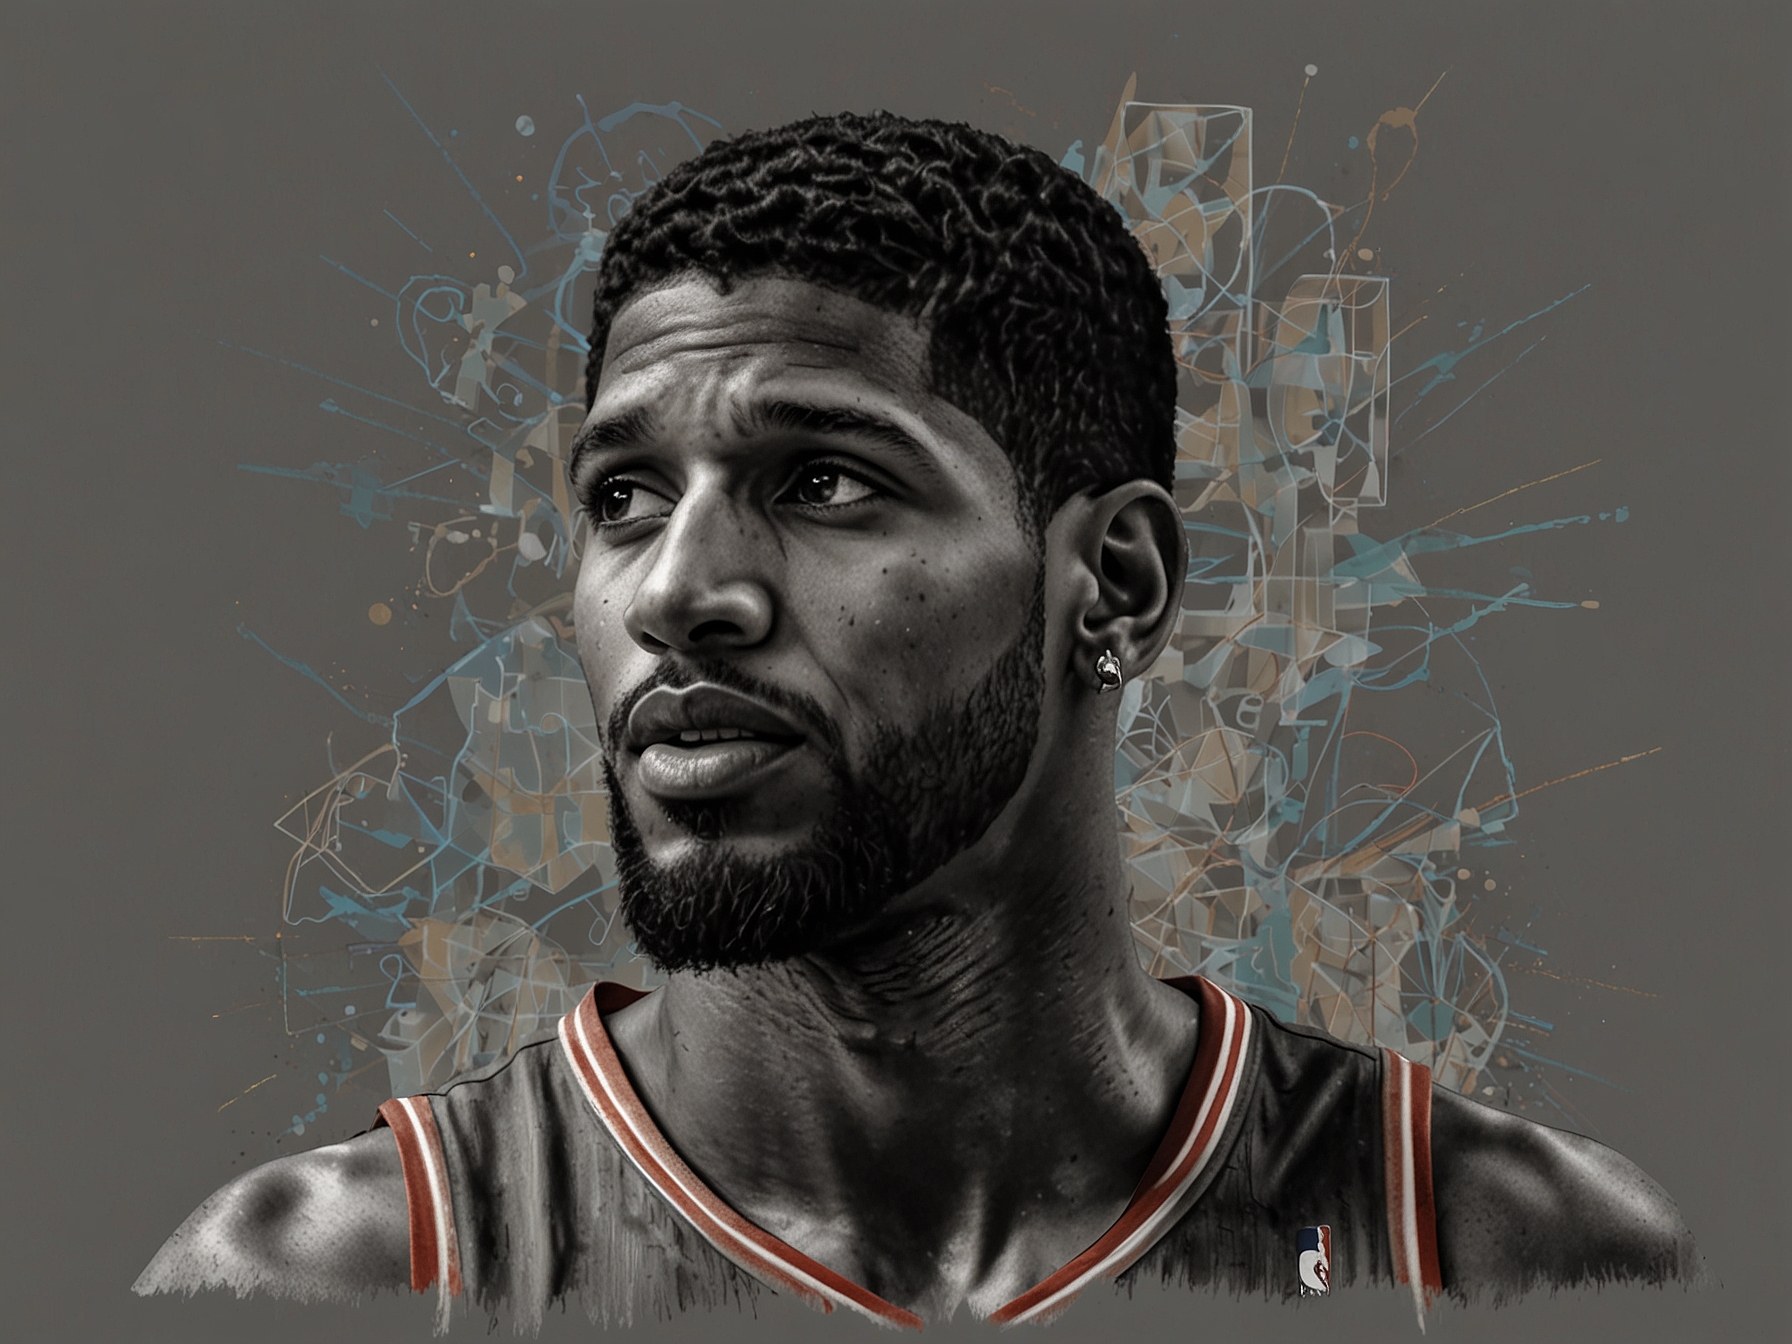 An image of Paul George in a Los Angeles Clippers jersey, emphasizing the high-profile nature of the trade offer declined by the Golden State Warriors in their commitment to Jonathan Kuminga.